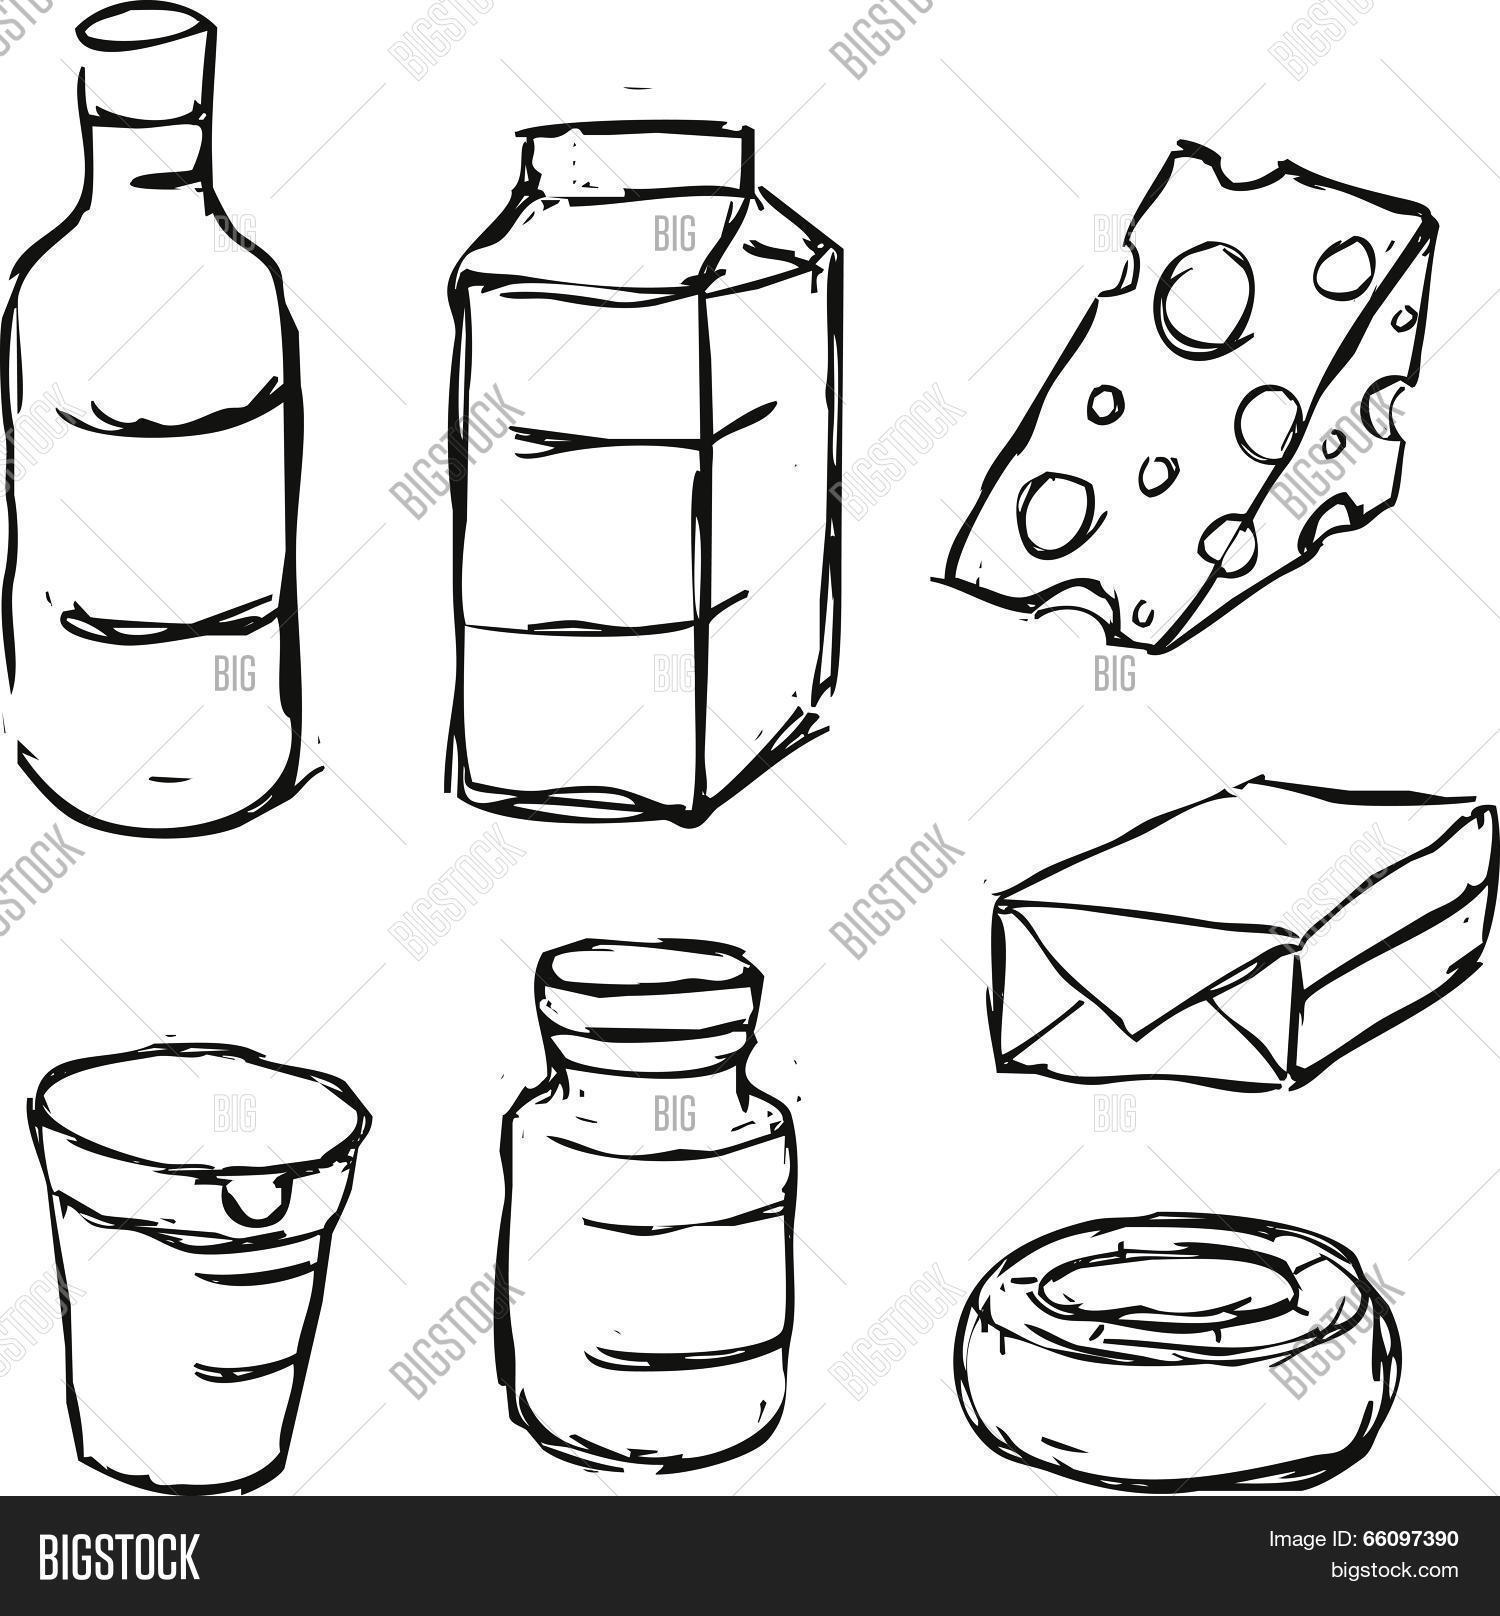 The best free Dairy drawing images. Download from 106 free drawings of